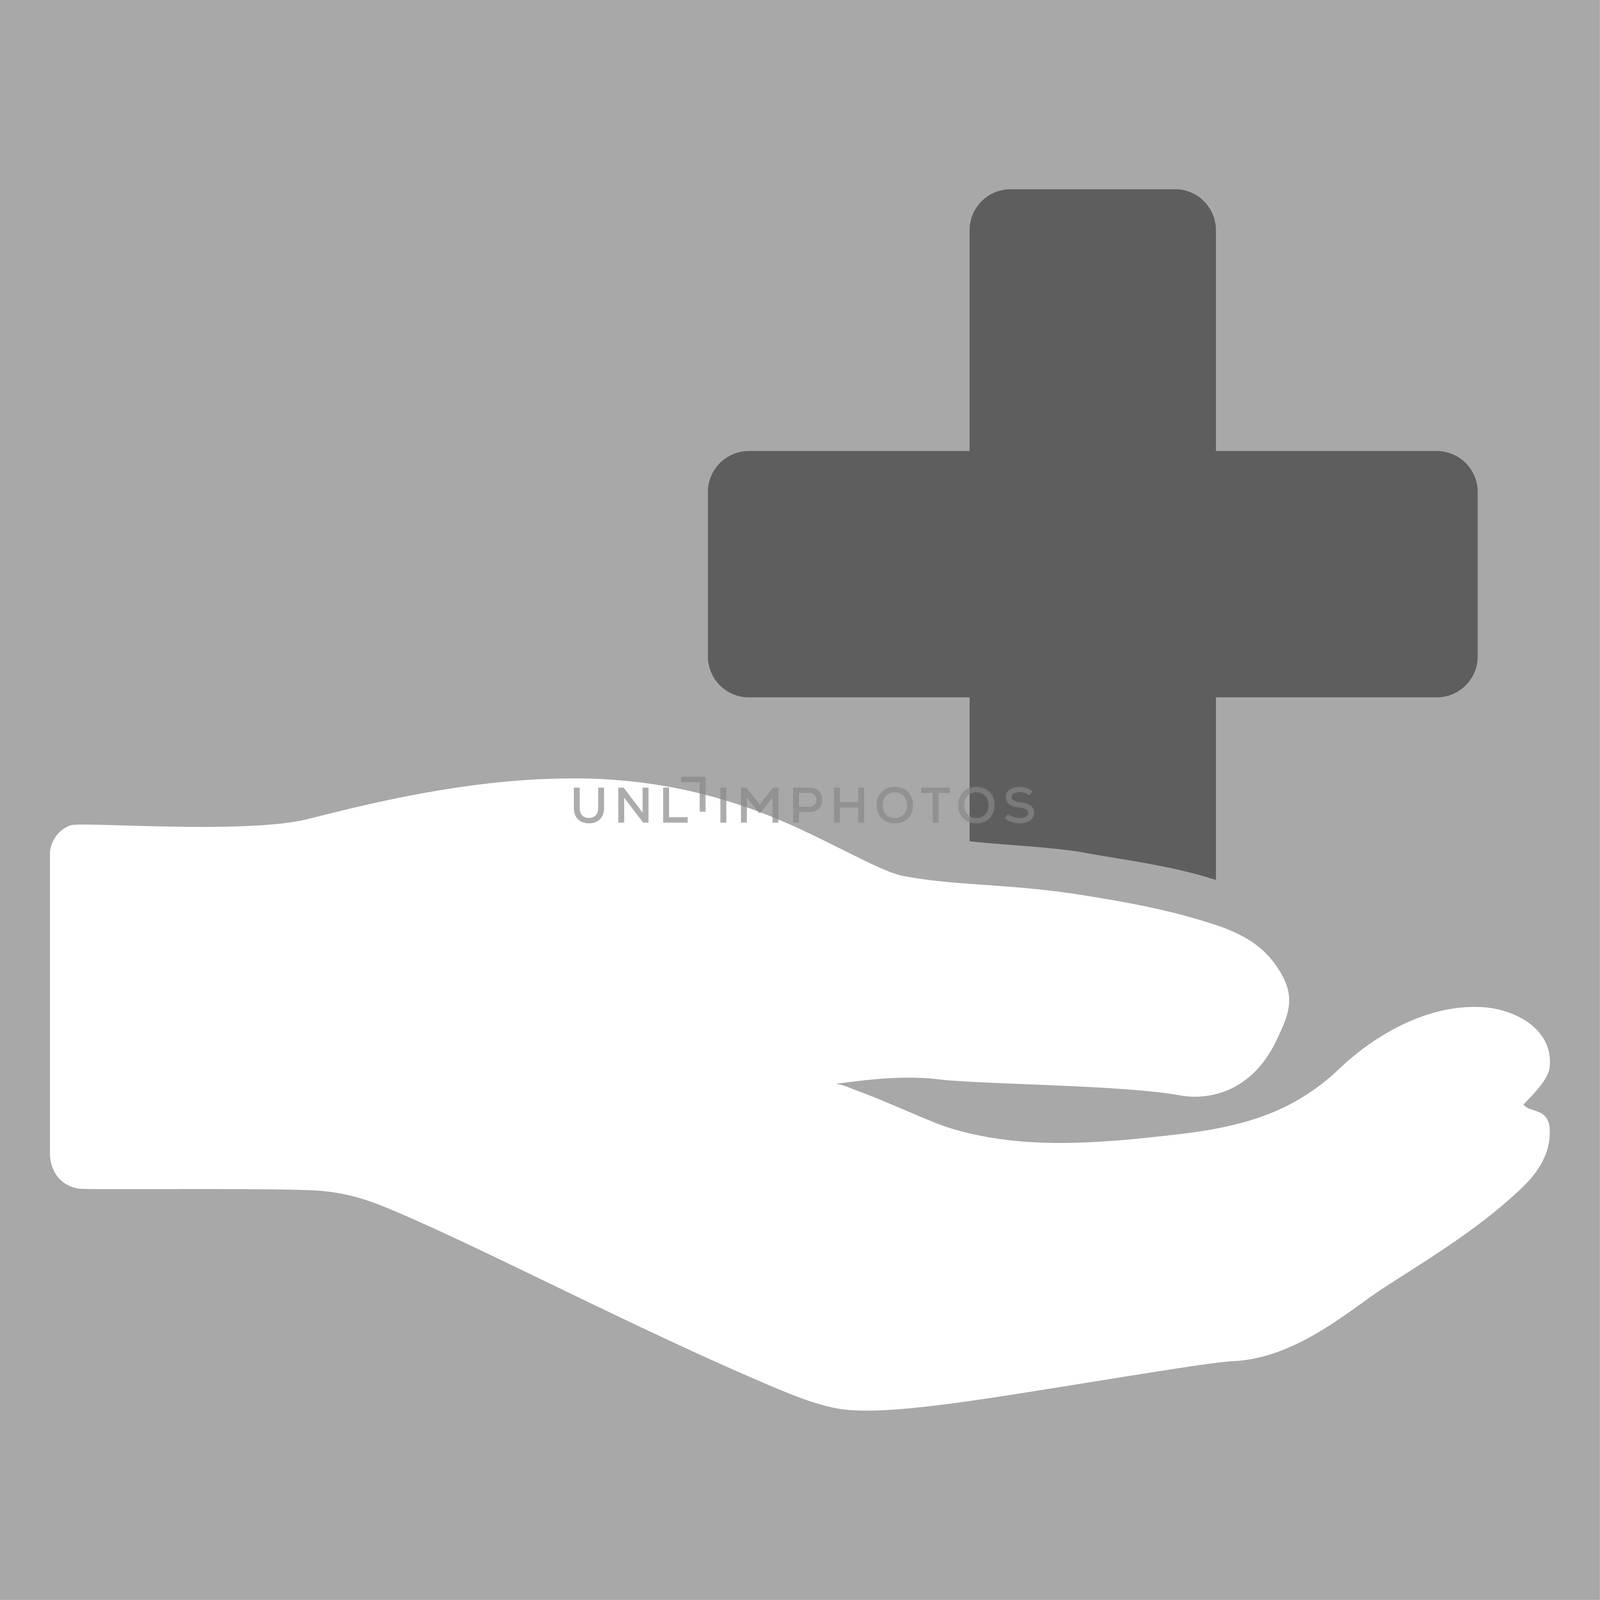 Health Care Donation raster icon. Style is bicolor flat symbol, dark gray and white colors, rounded angles, silver background.